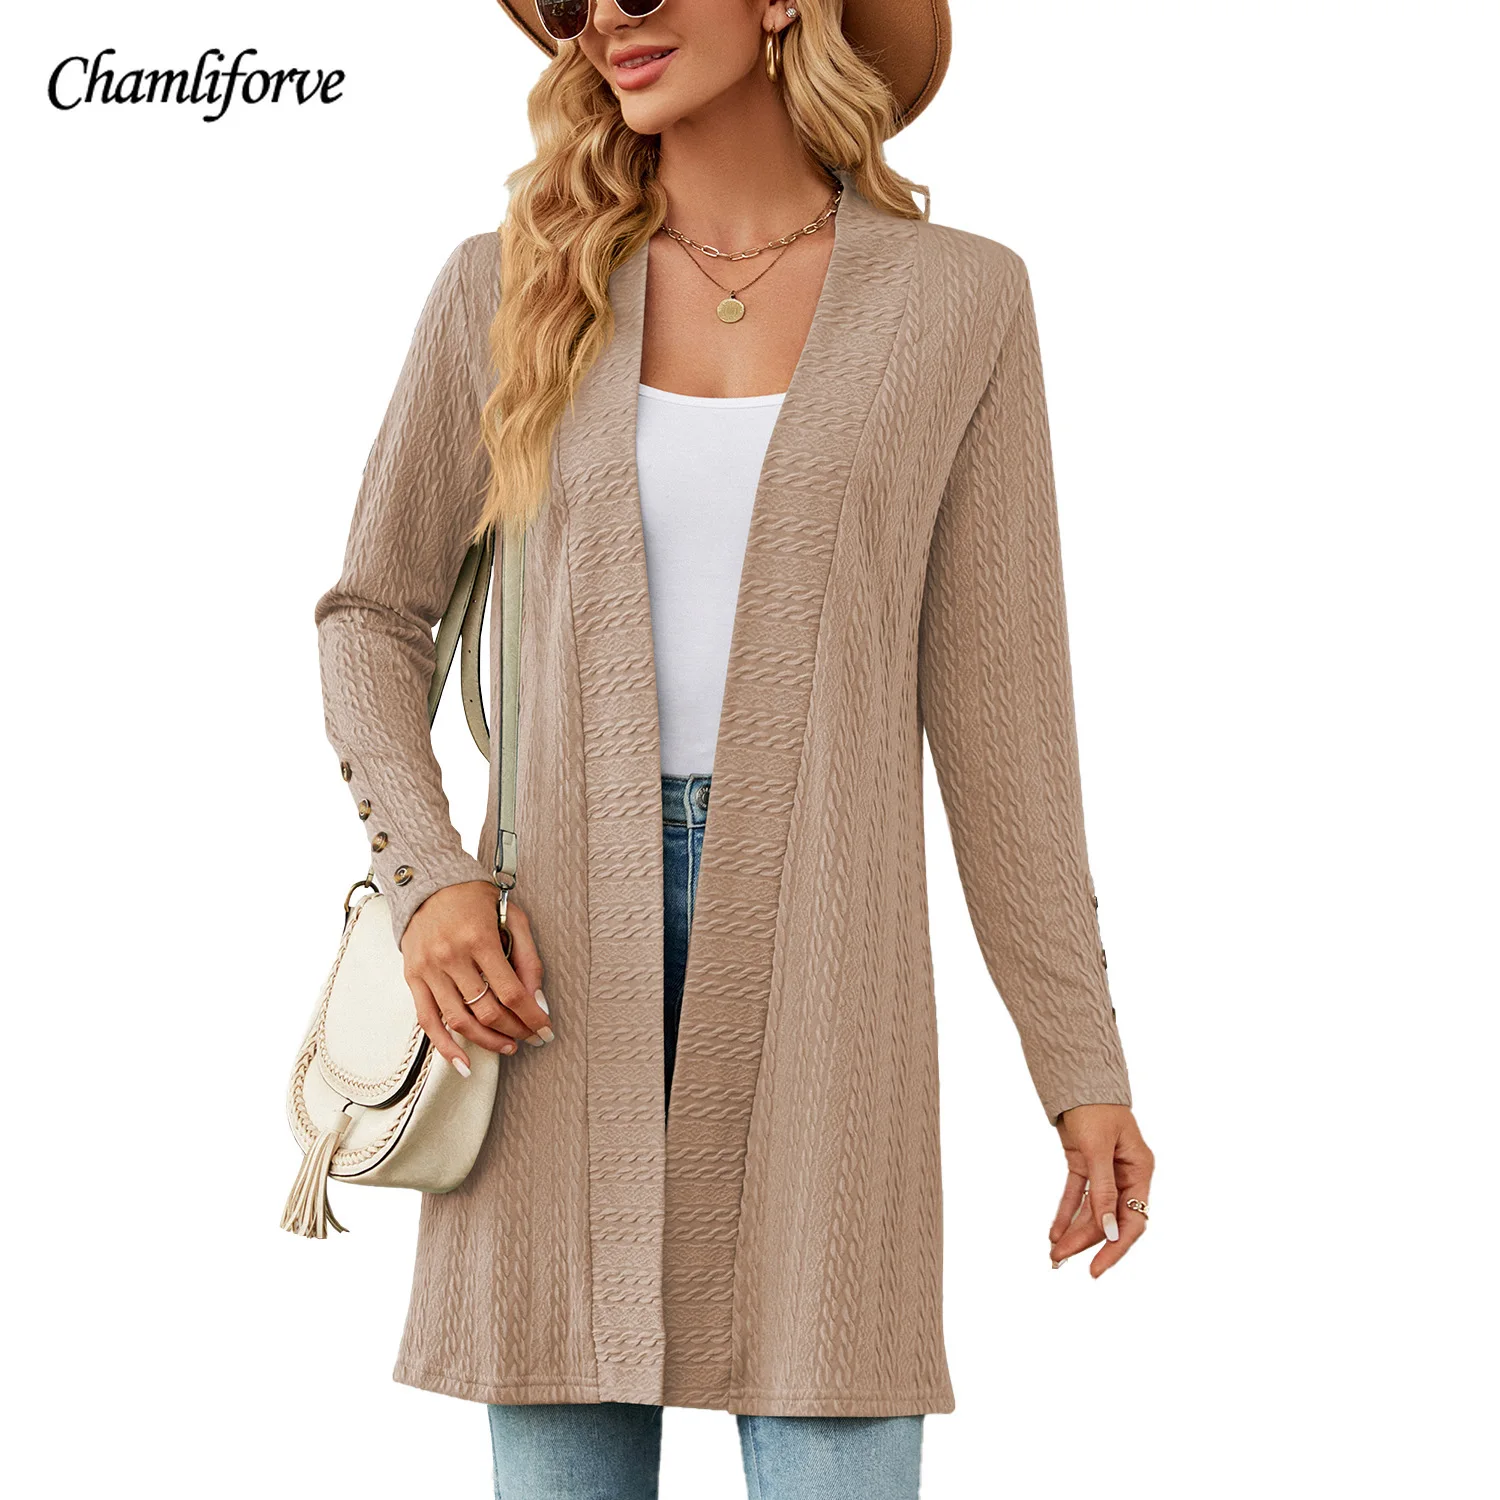 chamliforve 2023 autumn and winter new solid color button long sleeve loose cardigan coat for women coat women winter jacket women casual sweaters cardigan solid color autumn winter long sleeve cardigan loose women outwear knitted sweaters coat